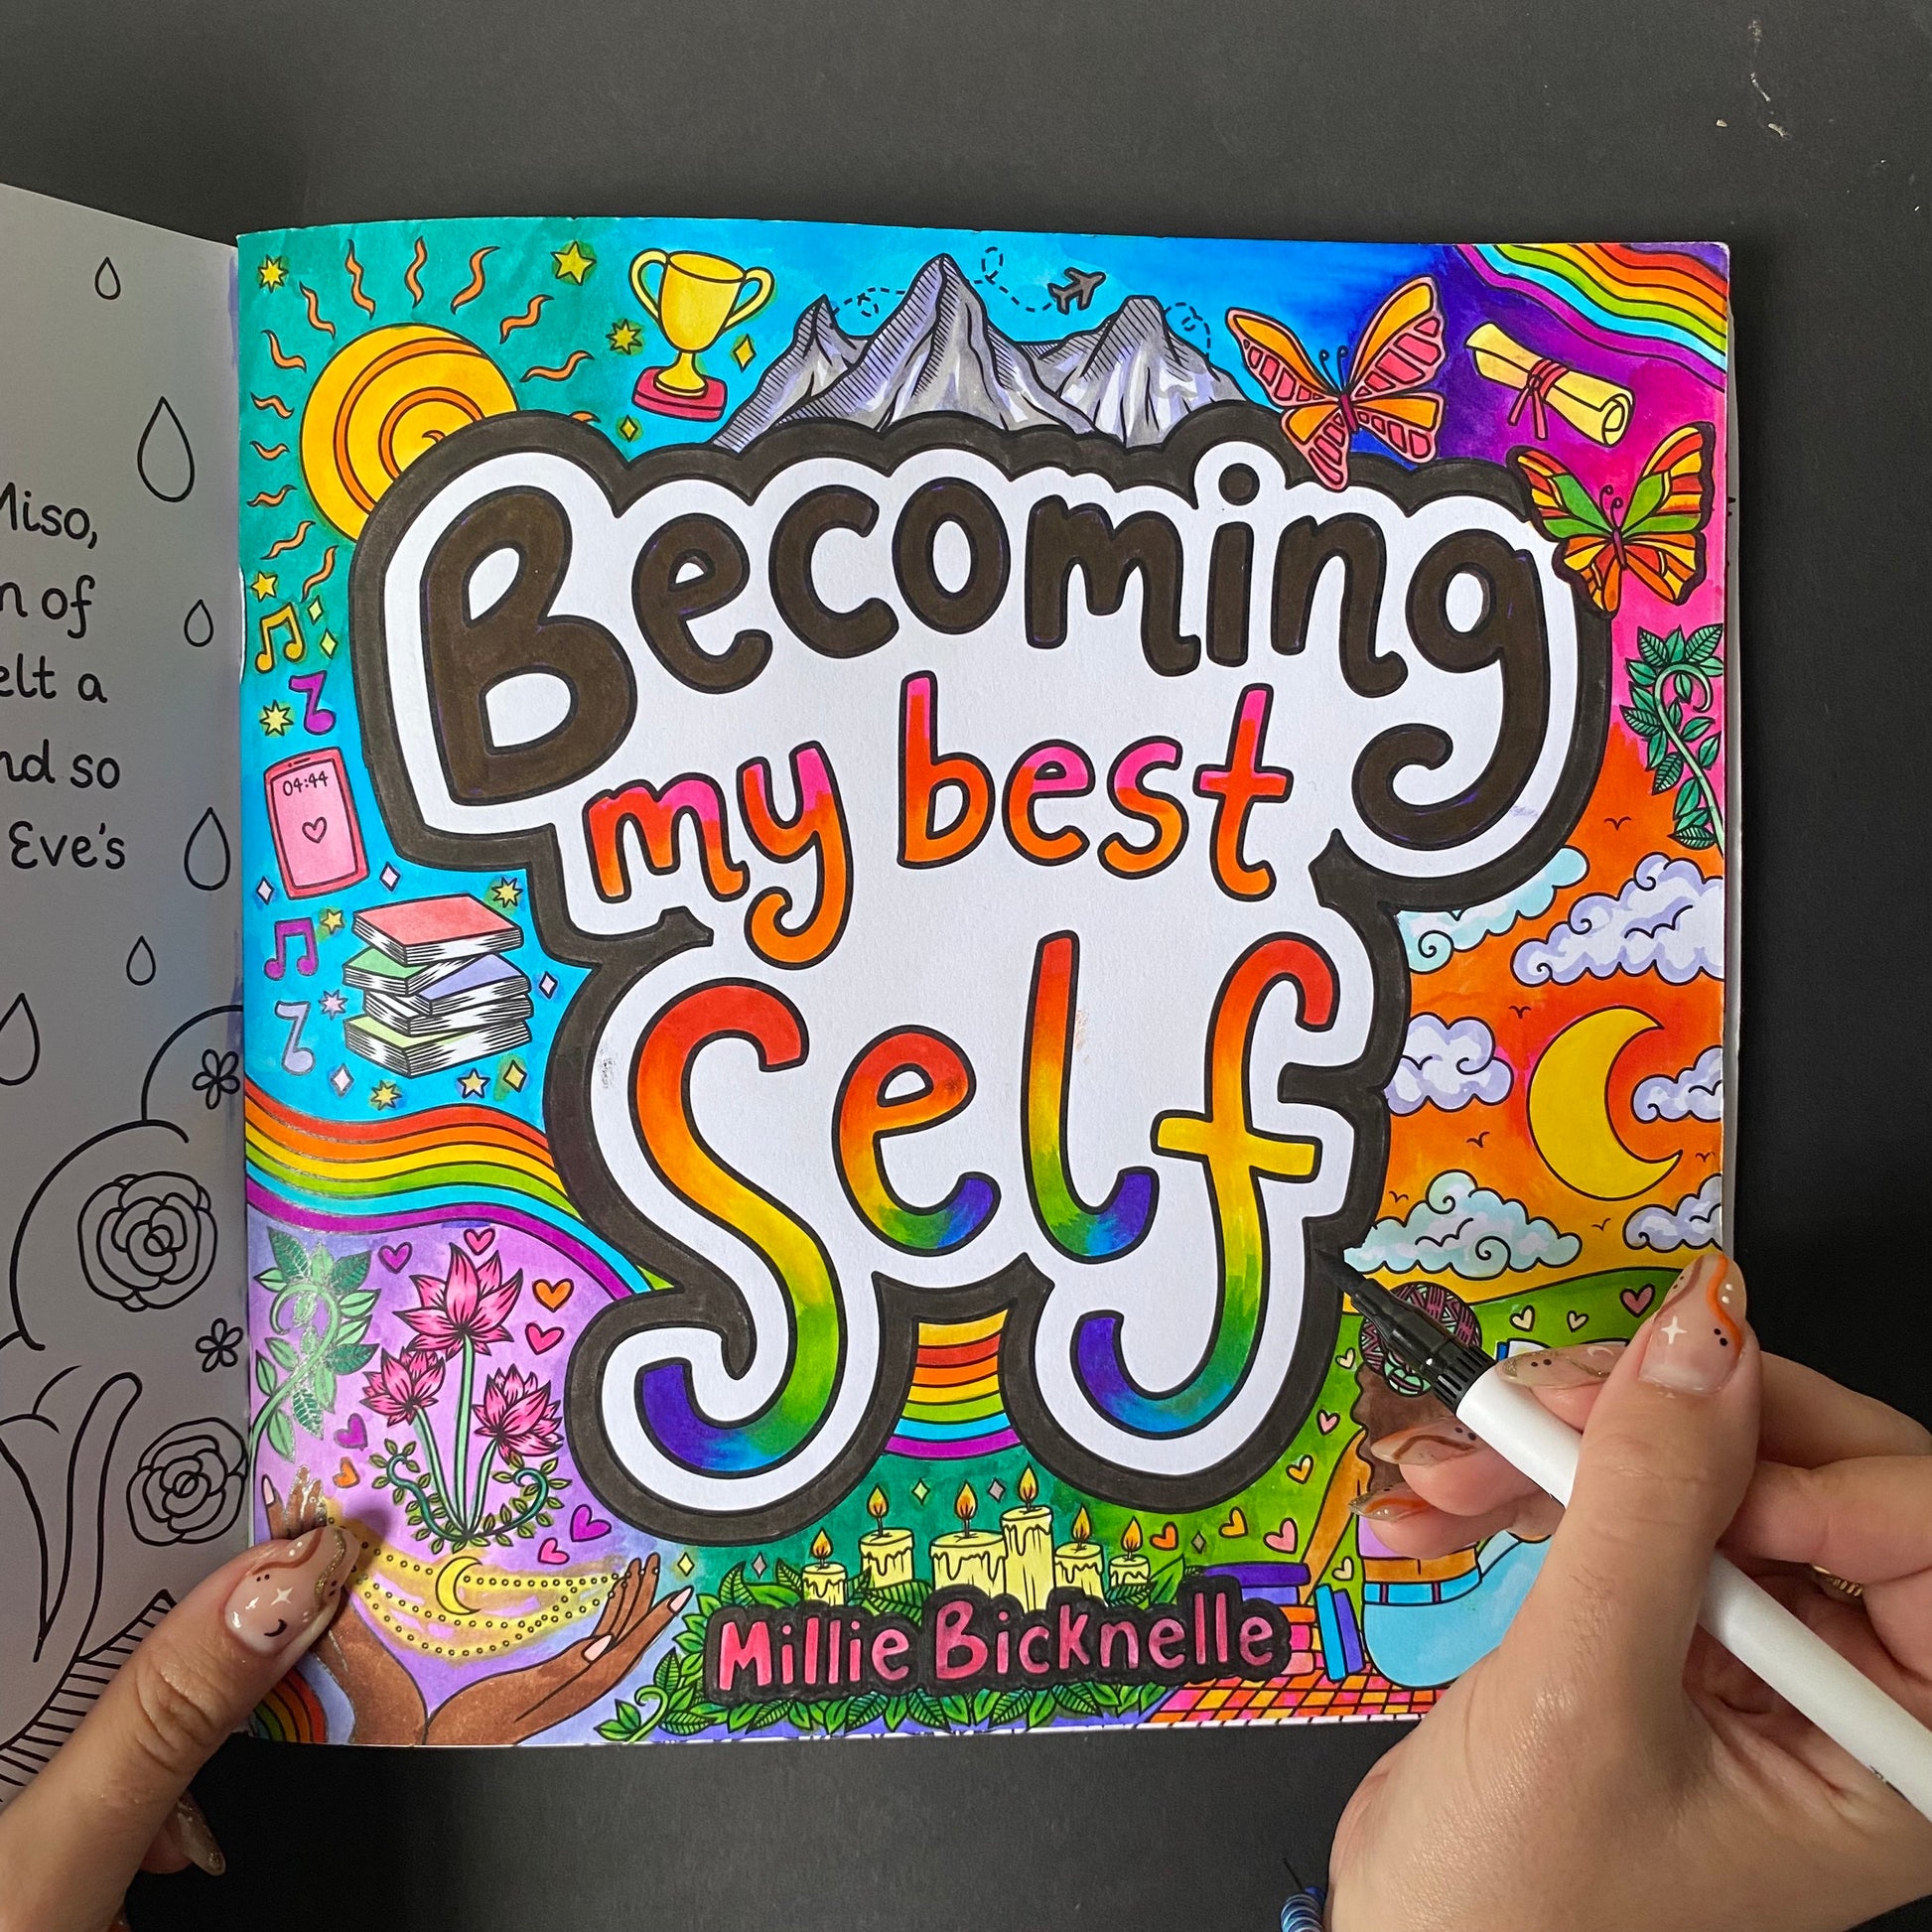 Self-Care Coloring Book for Teens and Adults: Perfect coloringbook